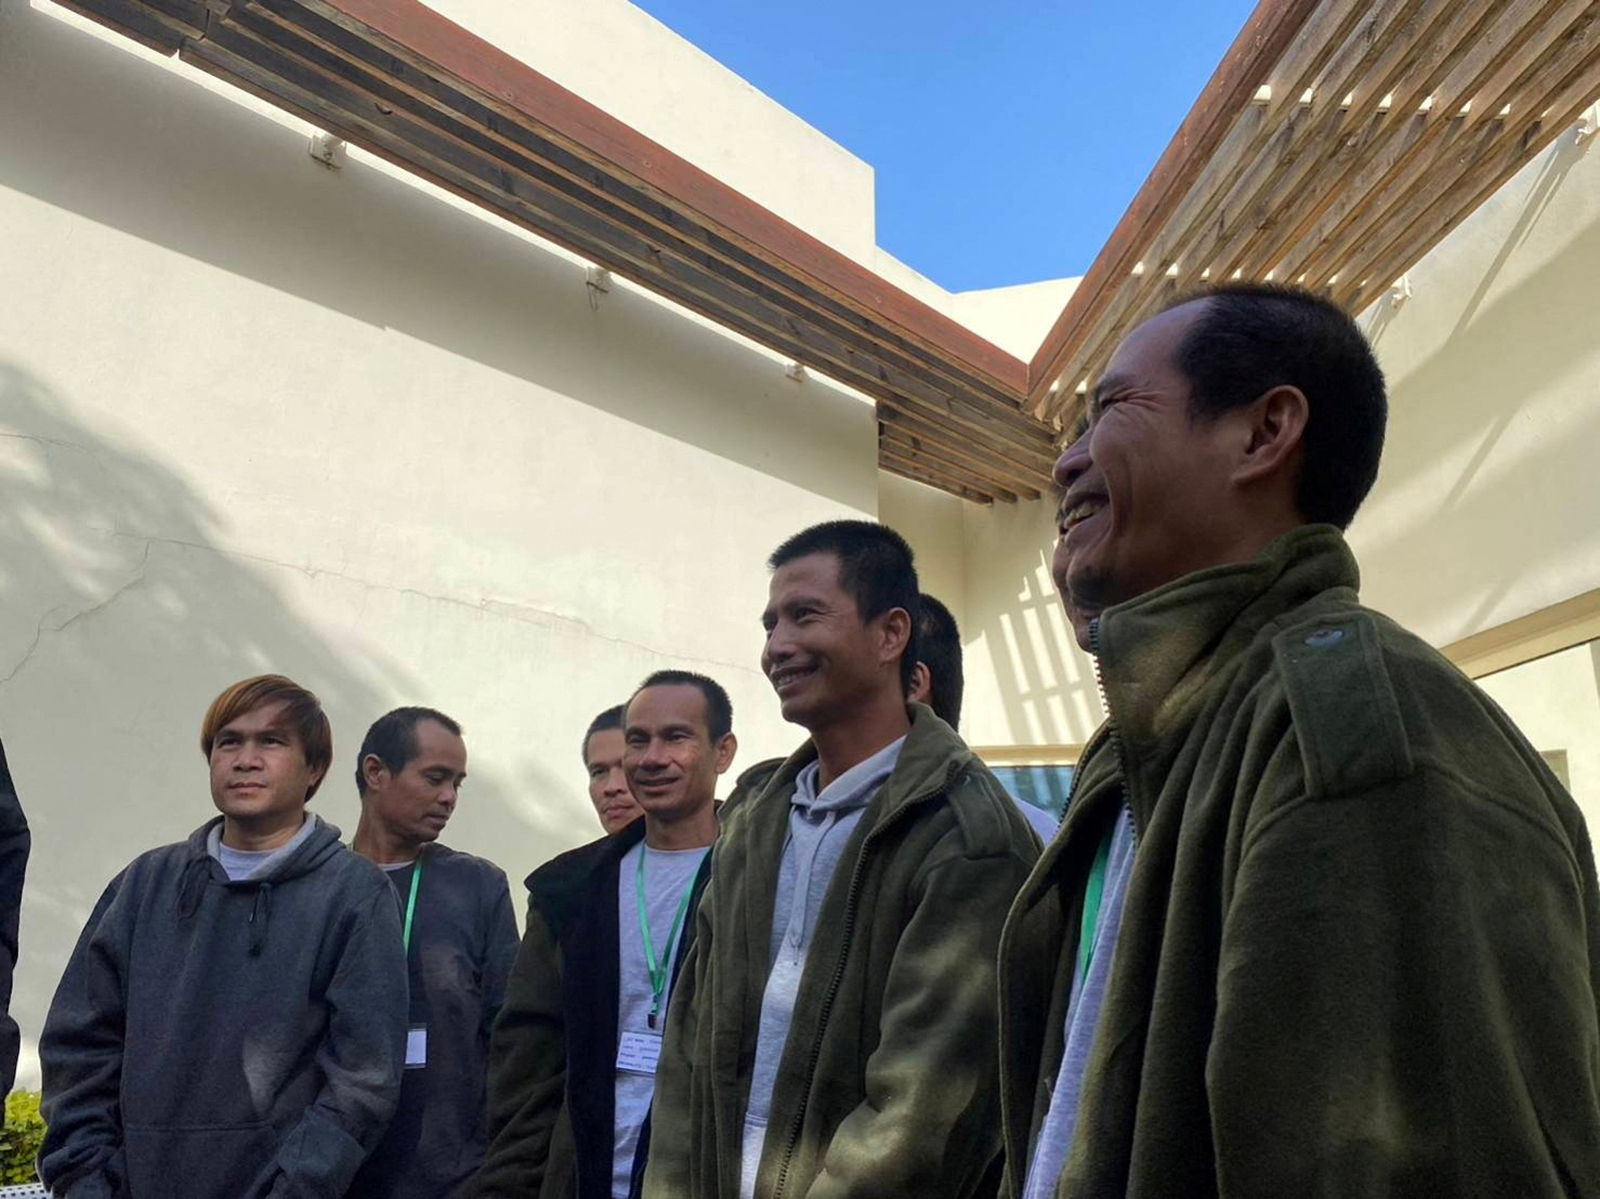 Thai citizens who were released from Gaza stand together during a visit by Ambassador of Thailand in Israel, Pannabha Chandraramya, in Be'er Ya'akov, Israel on November 26.